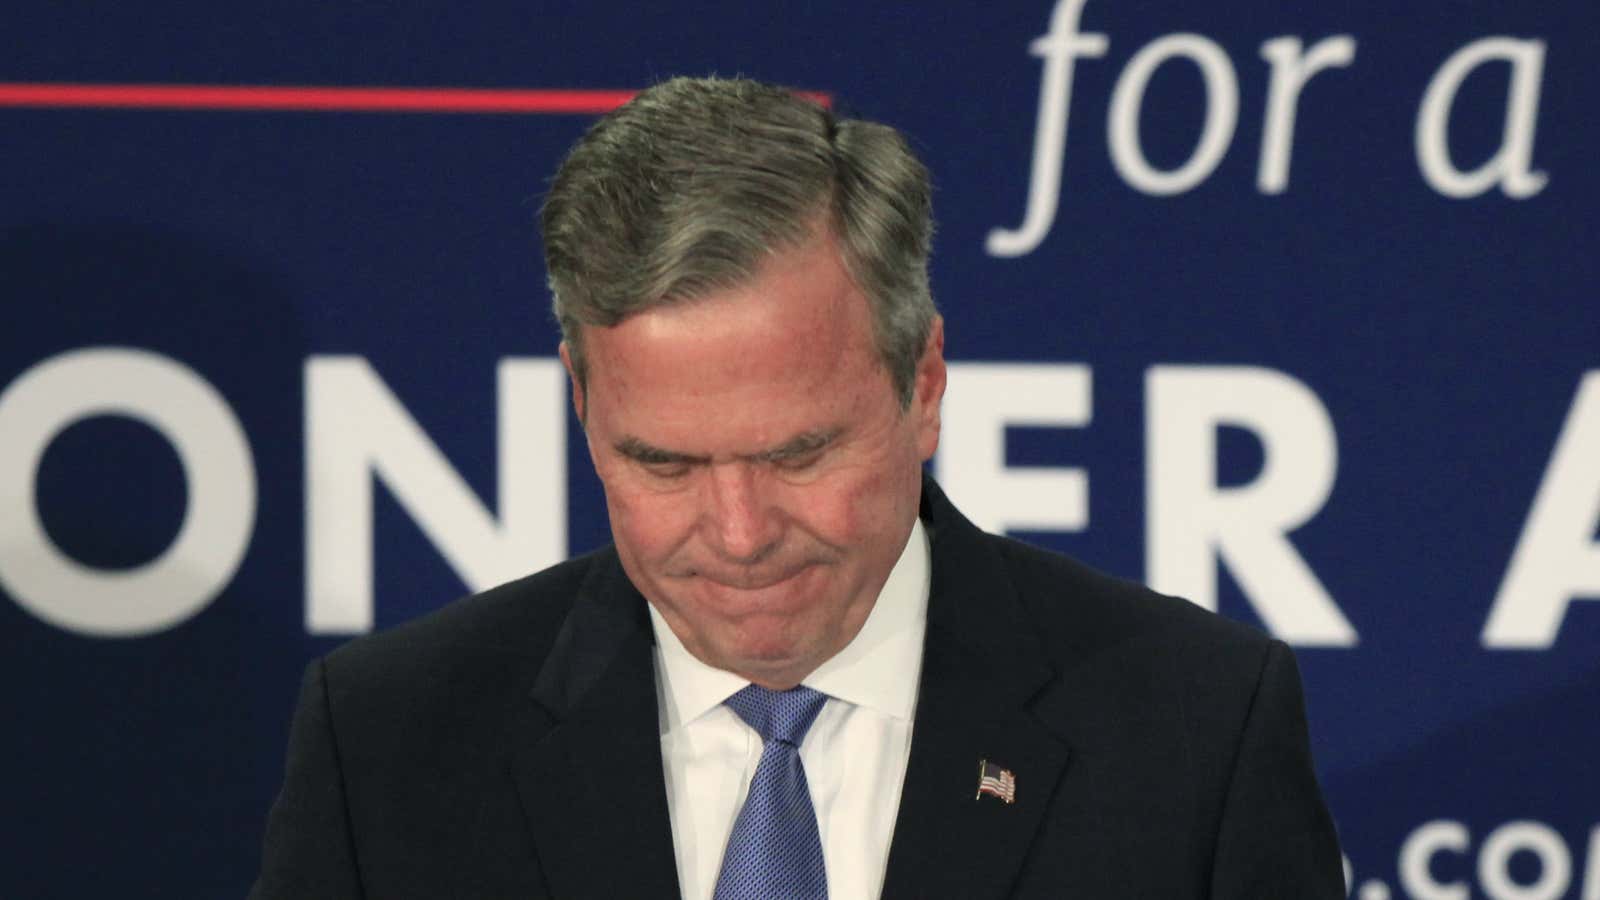 Jeb Bush ends his plans to become the third Bush president.